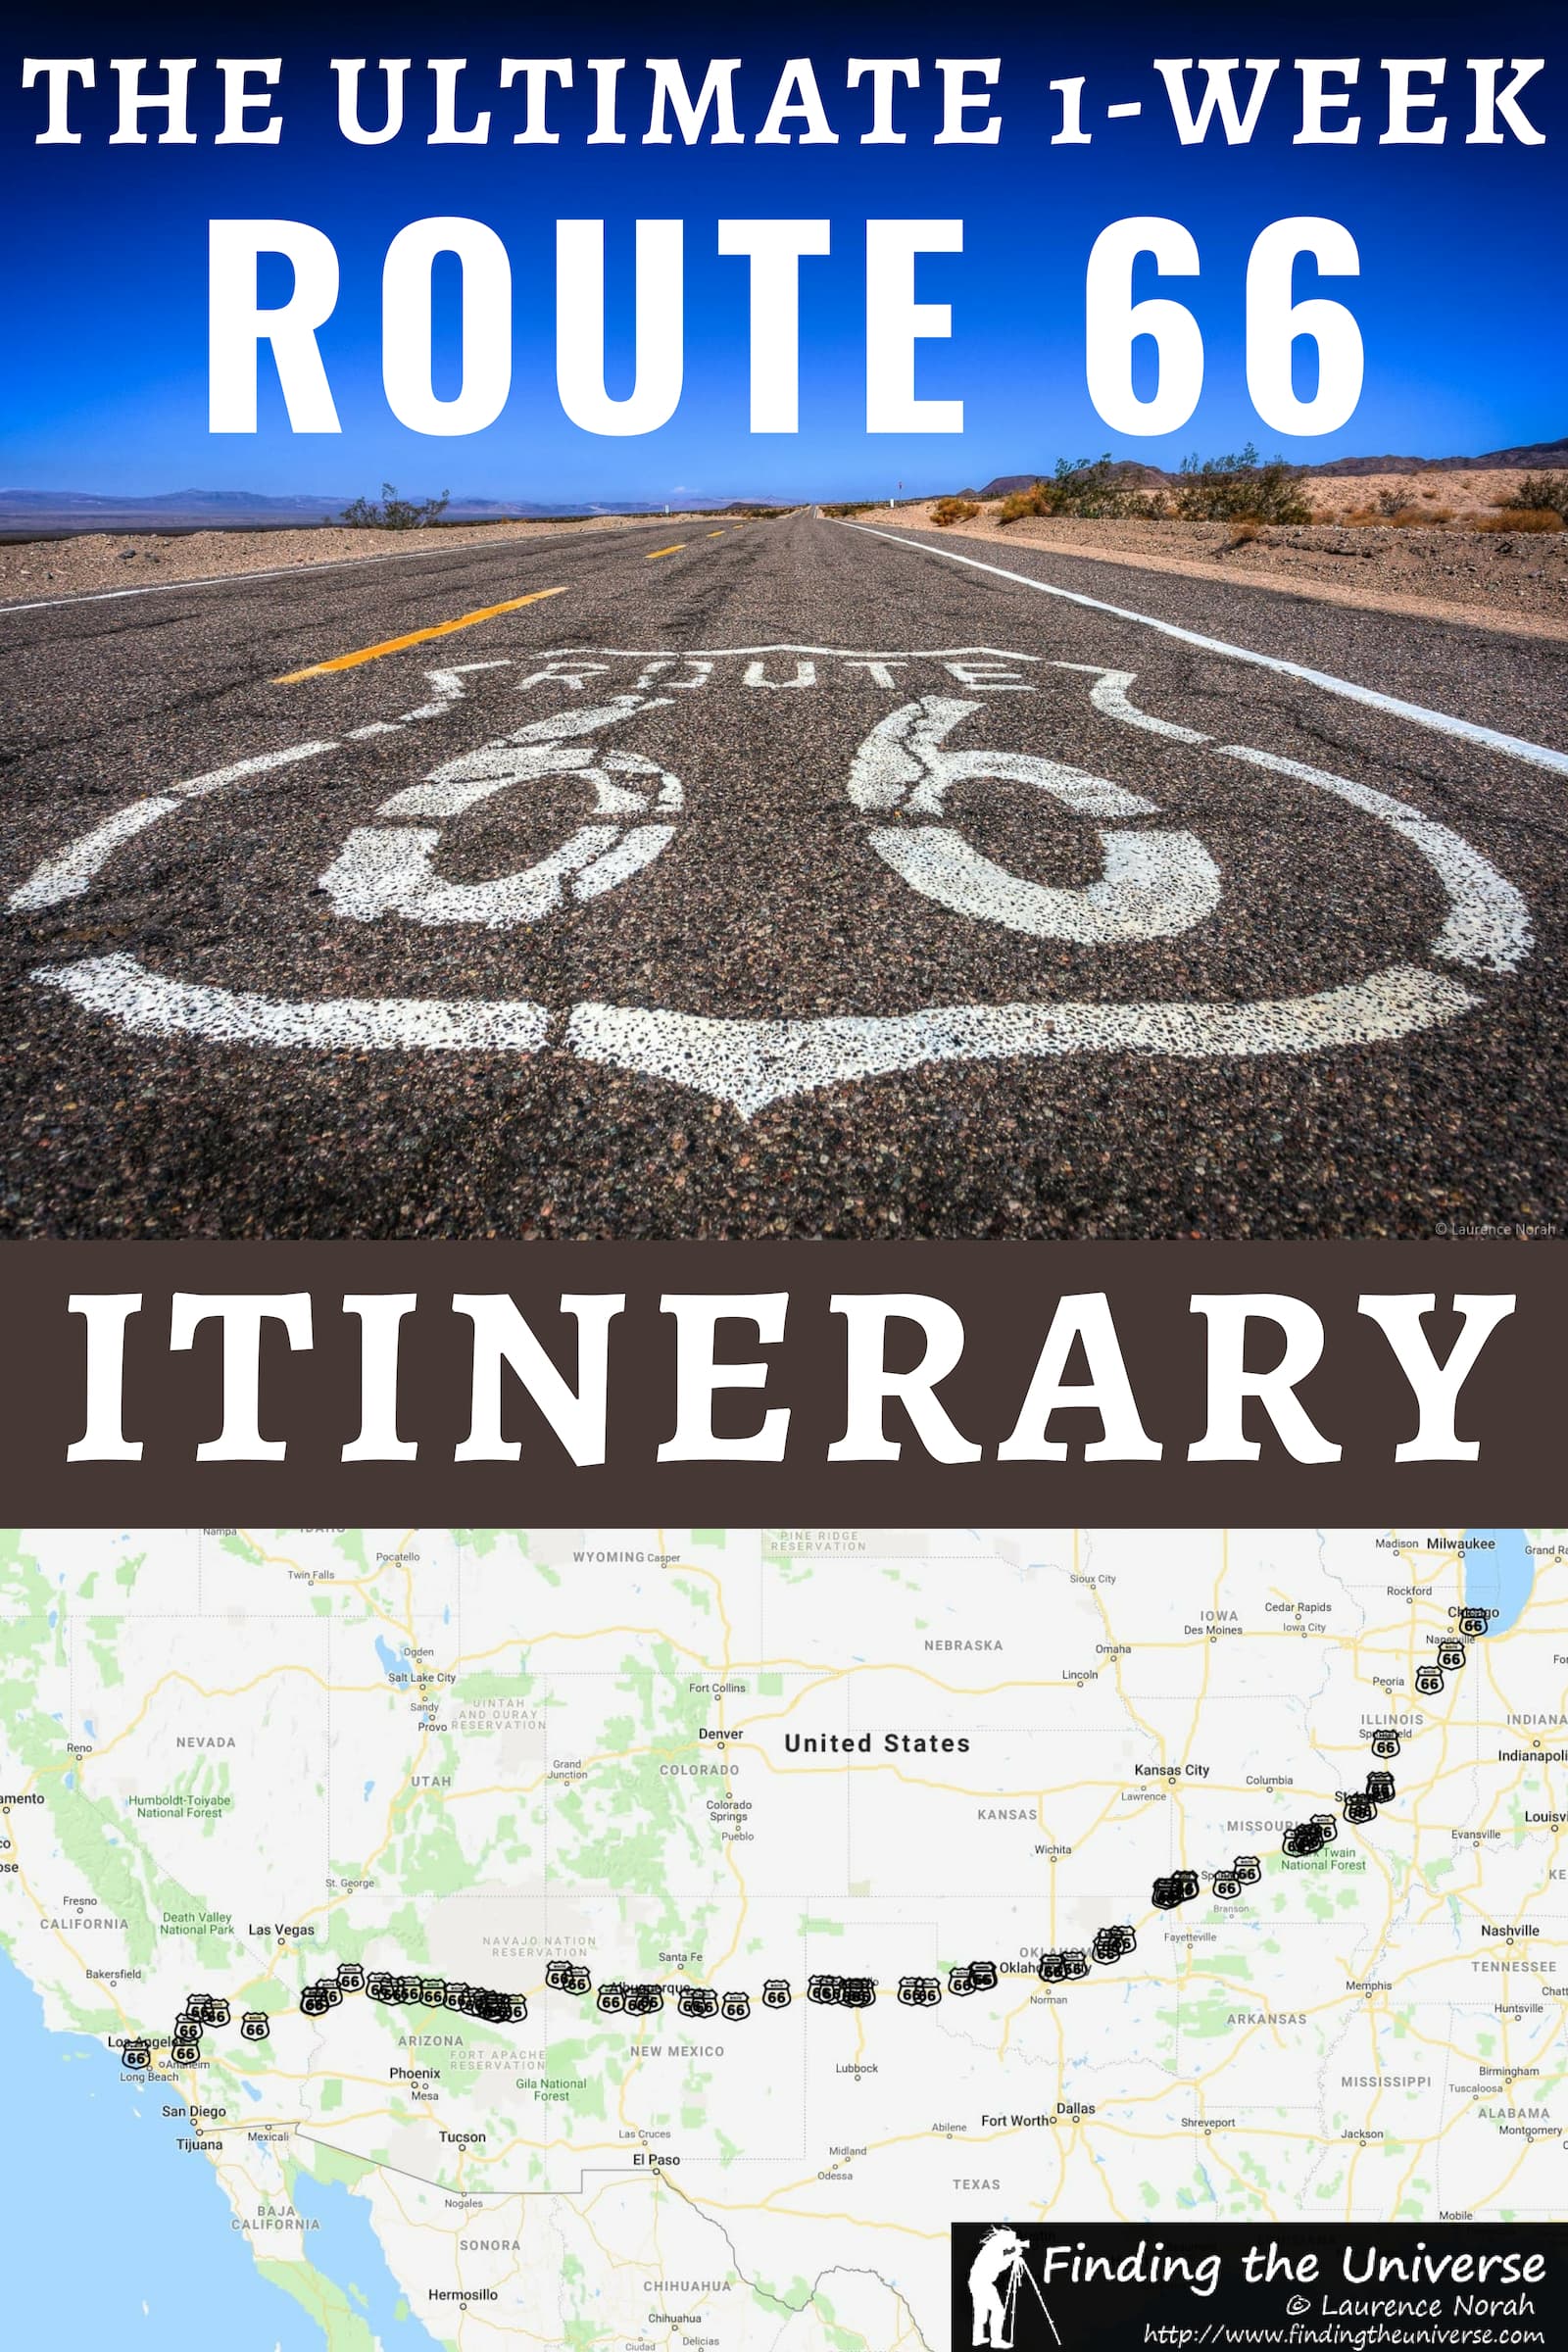 The perfect 1 Week Route 66 USA road trip itinerary. Day by day instructions for the trip, plus all the attractions, lodging options, and map of the route!